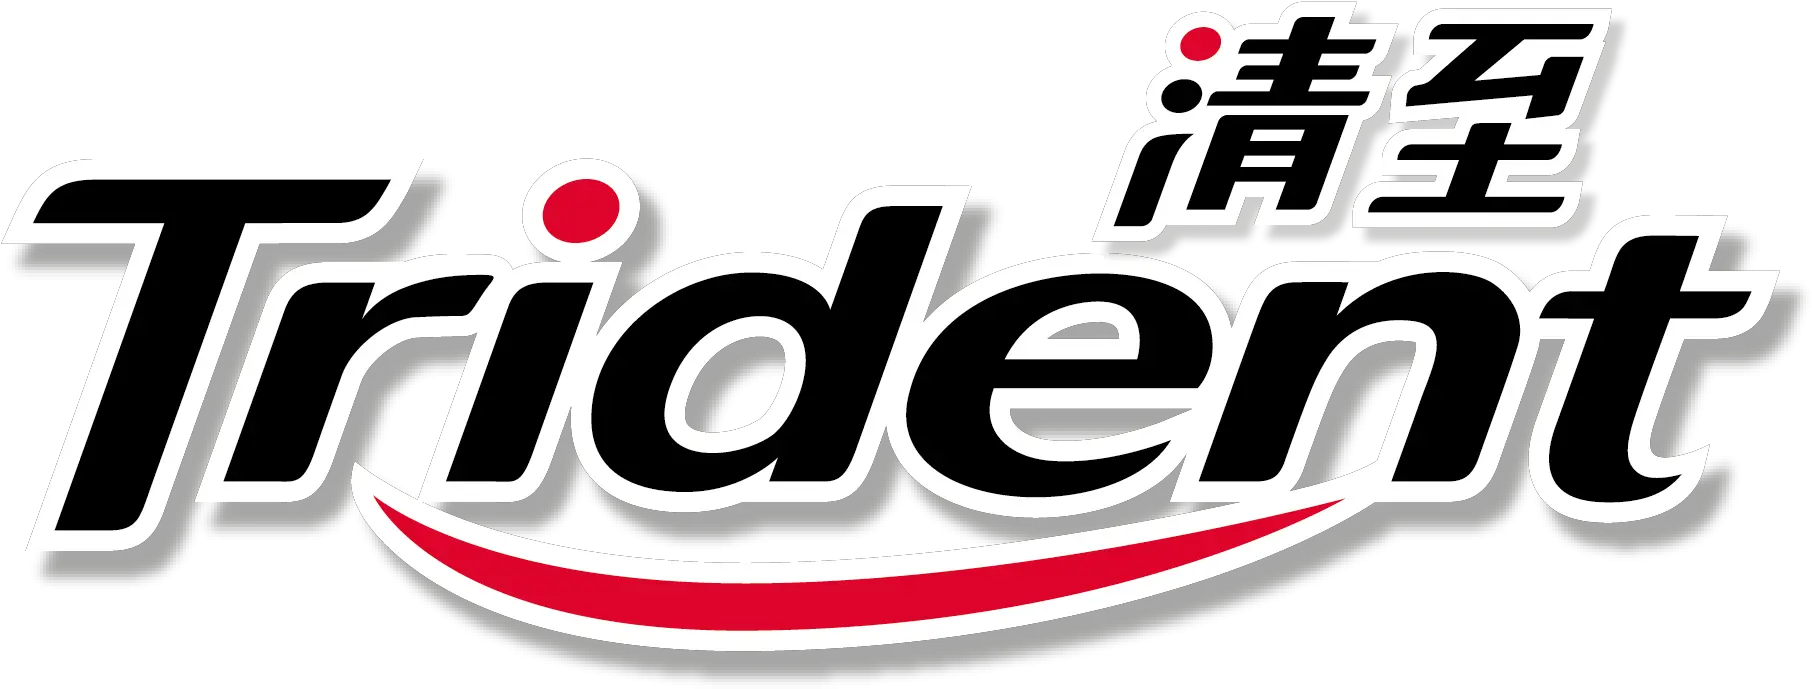 Trident Gum Logo Trident Png Trident Png